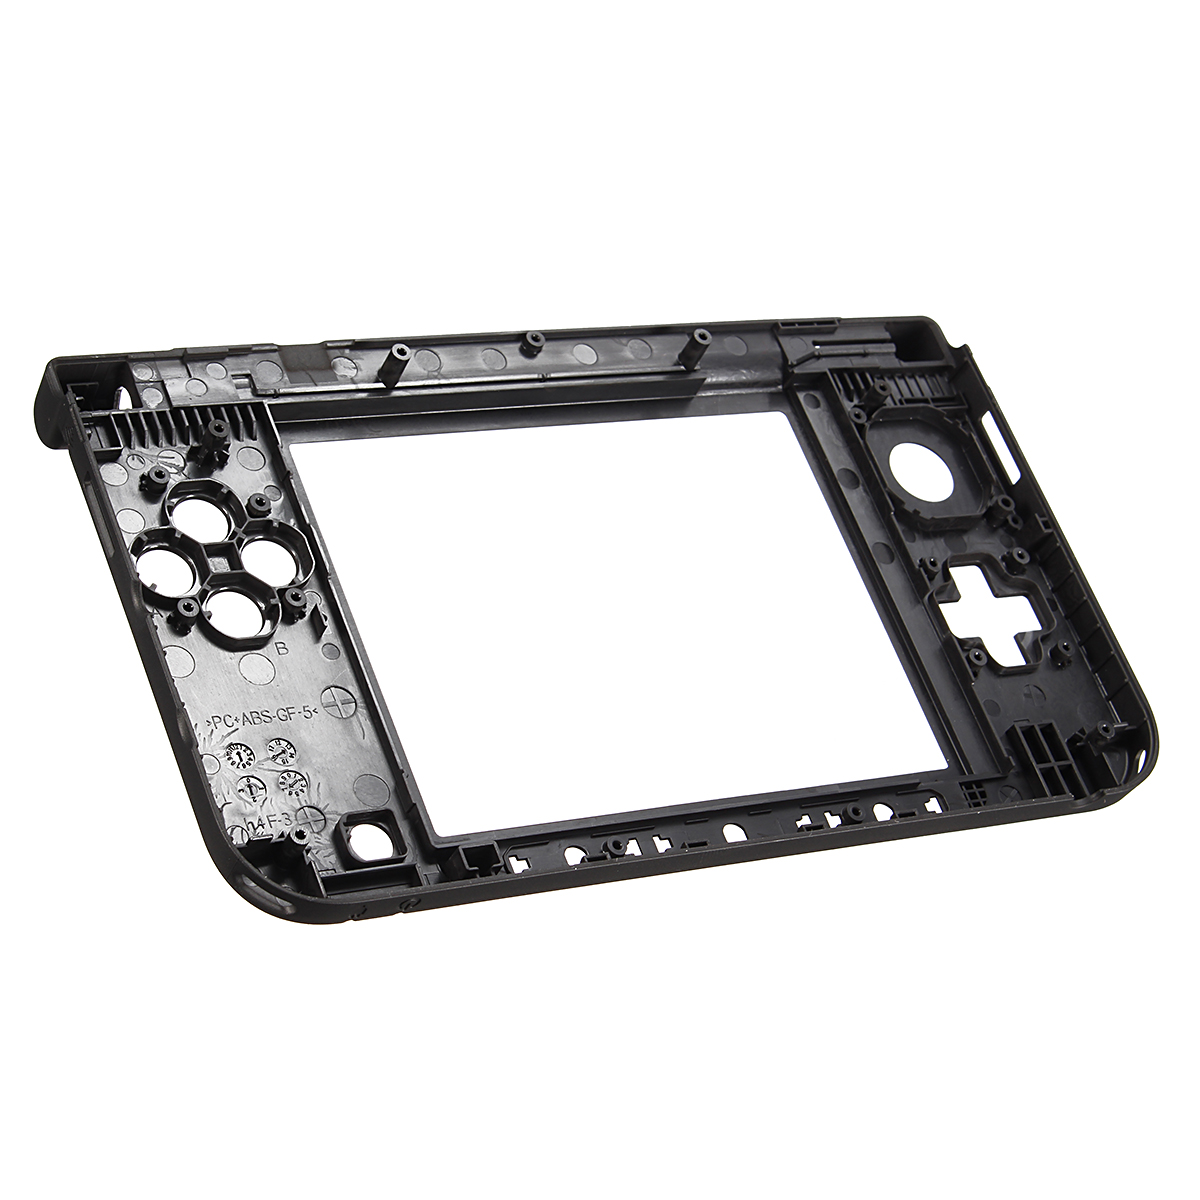 Replacement Bottom Middle Frame Housing Shell Cover Case for Nintendo 3DS XL 3DS LL Game Console 32